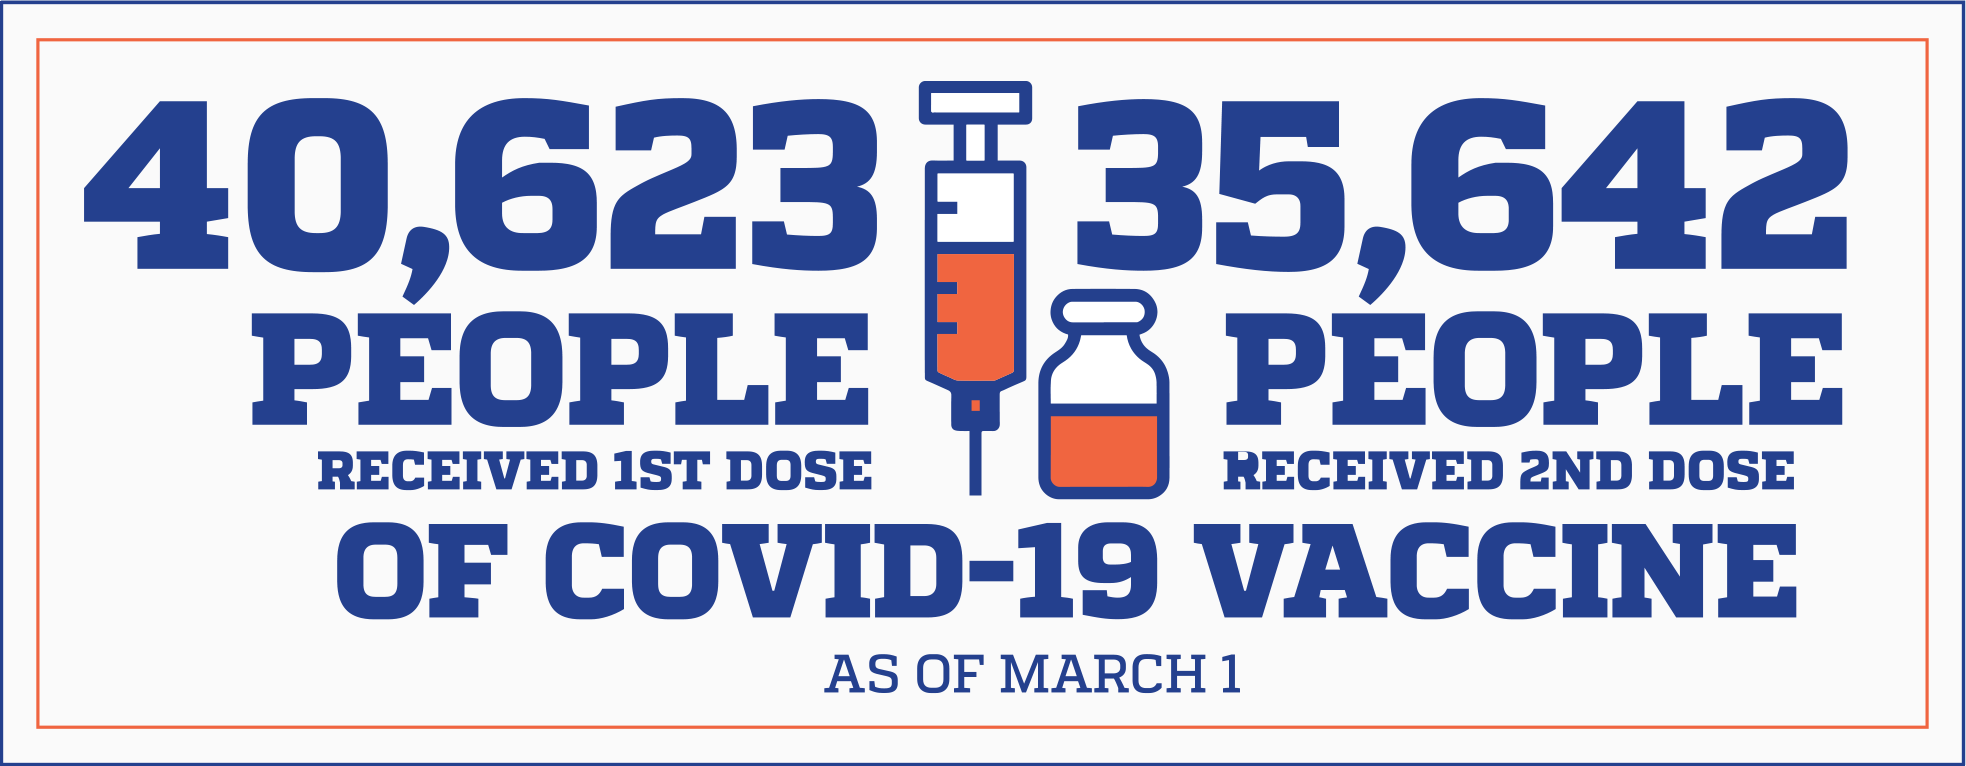 As of March 1st, 40,623 people have received their 1st dose and 35,642 people have received their second dose of COVID-19 vaccine.